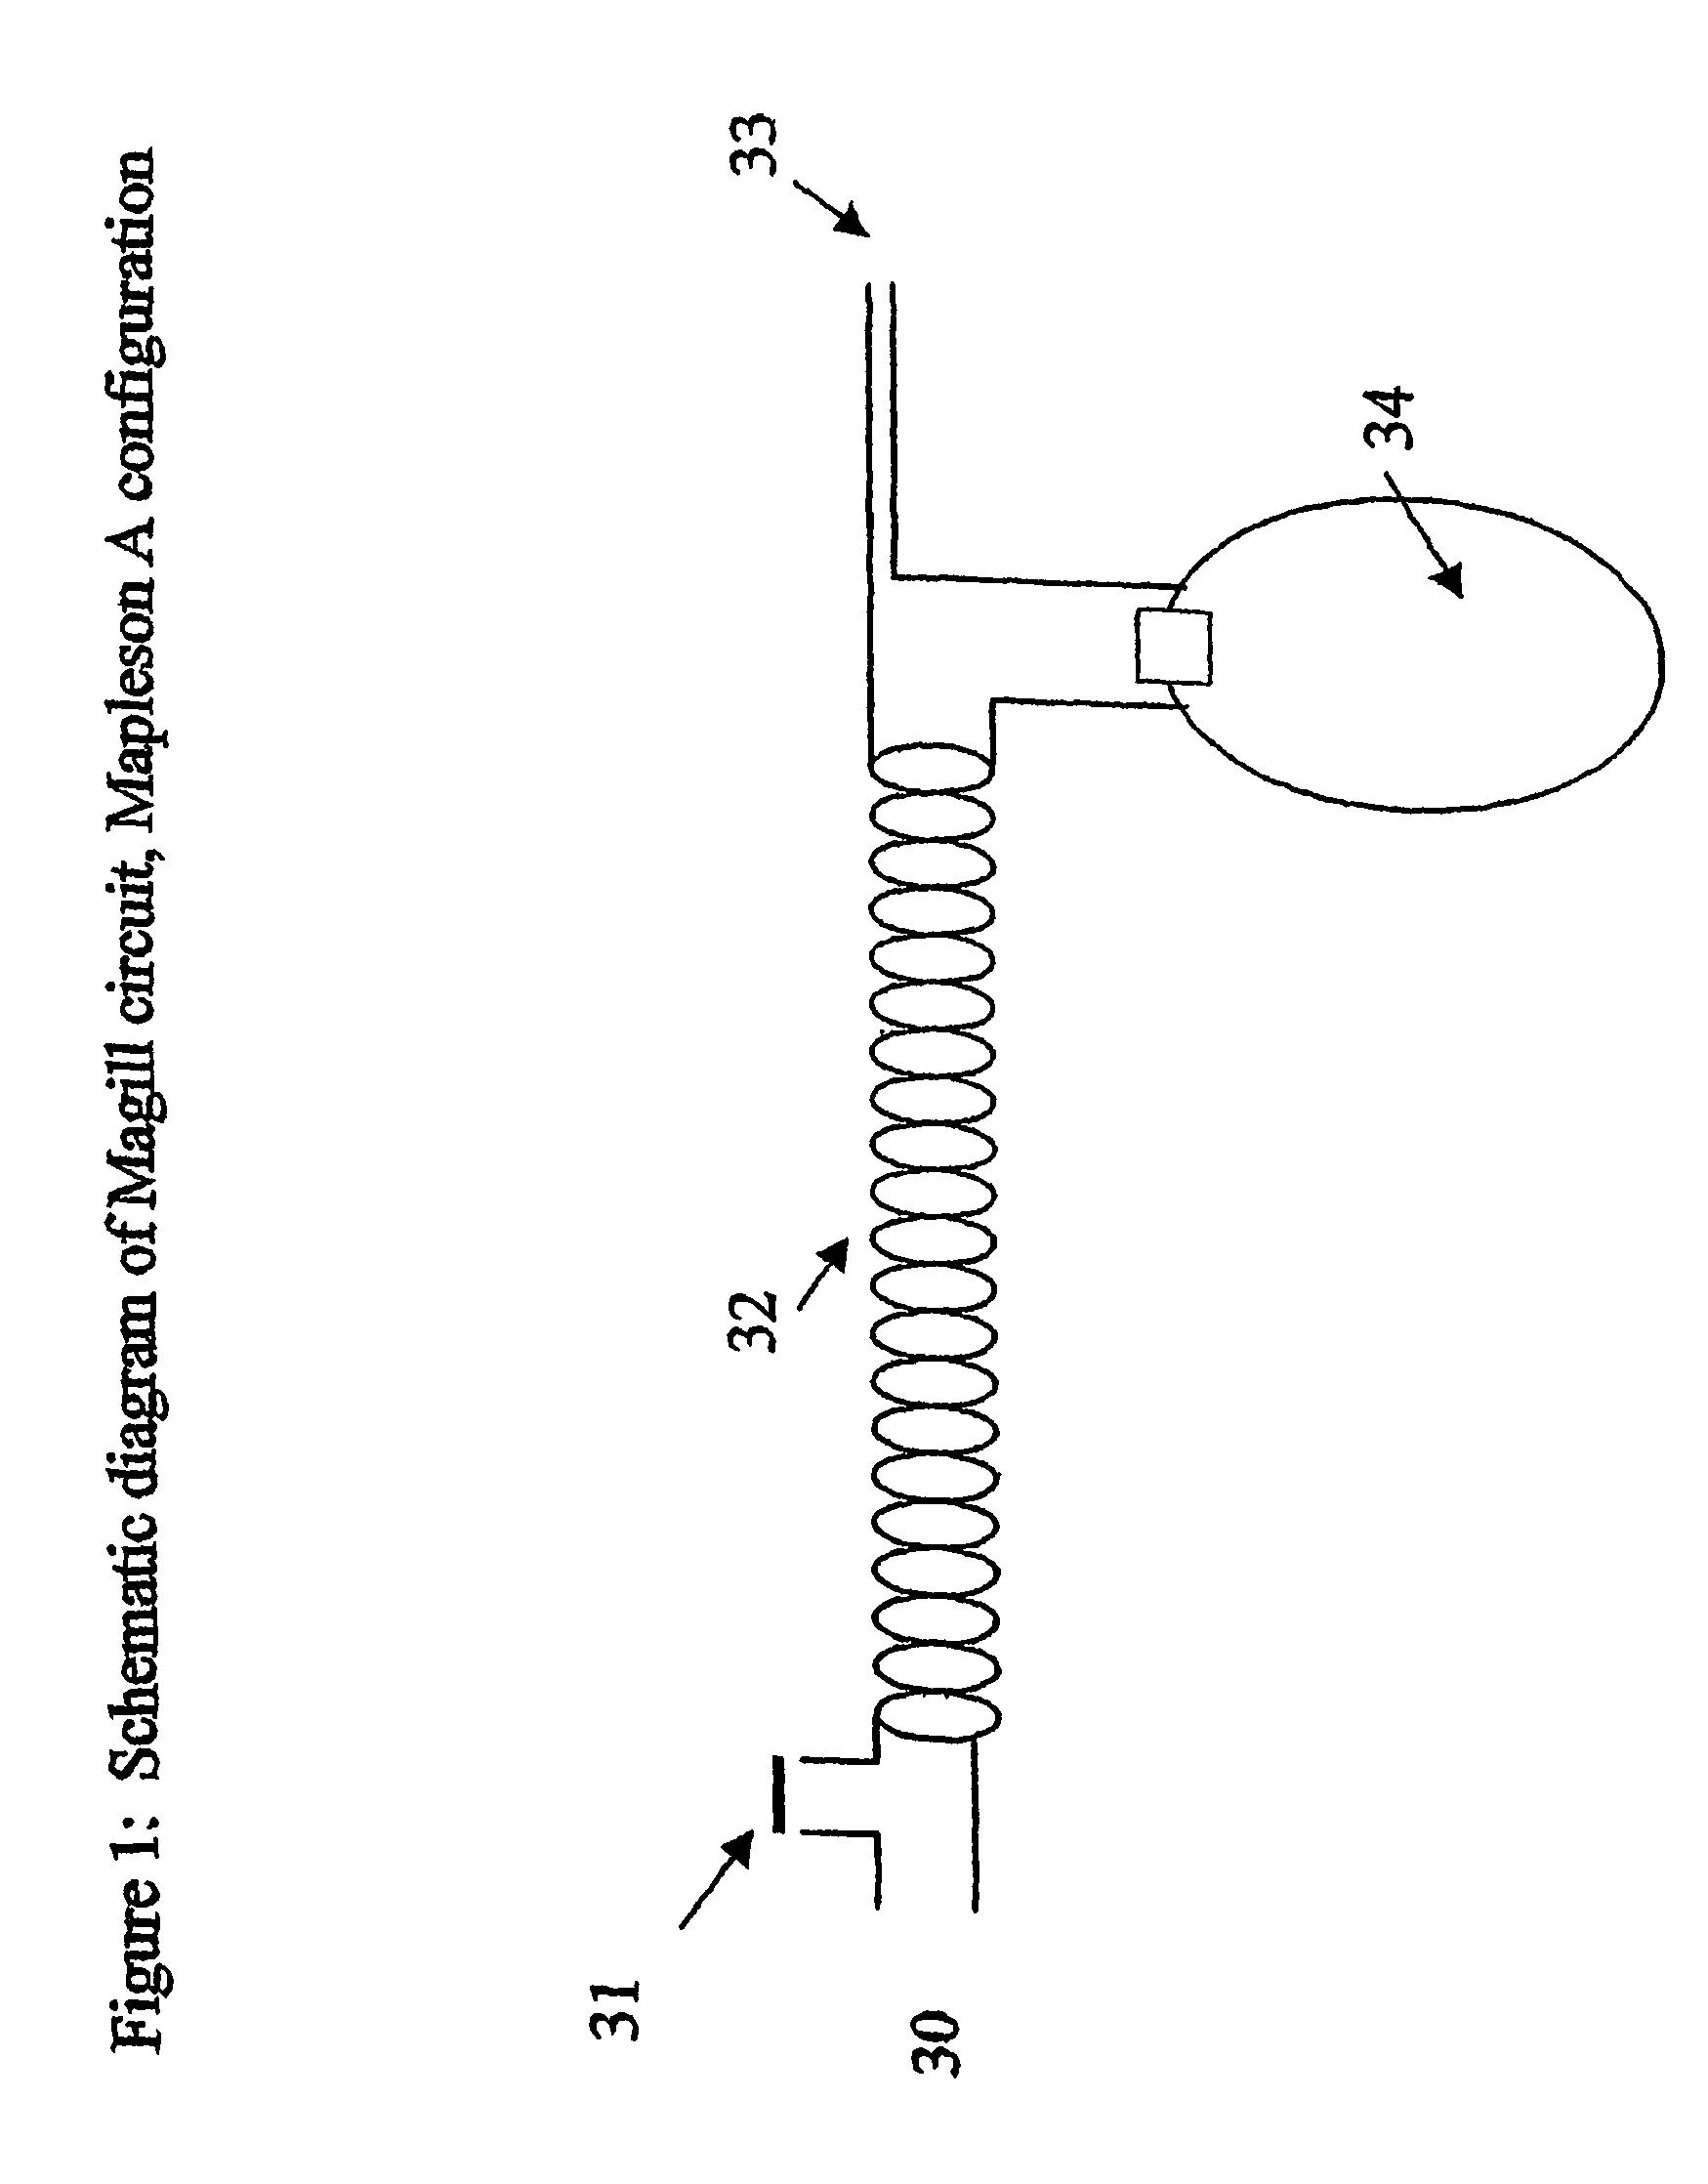 Method for continuous measurement of flux of gases in the lungs during breathing